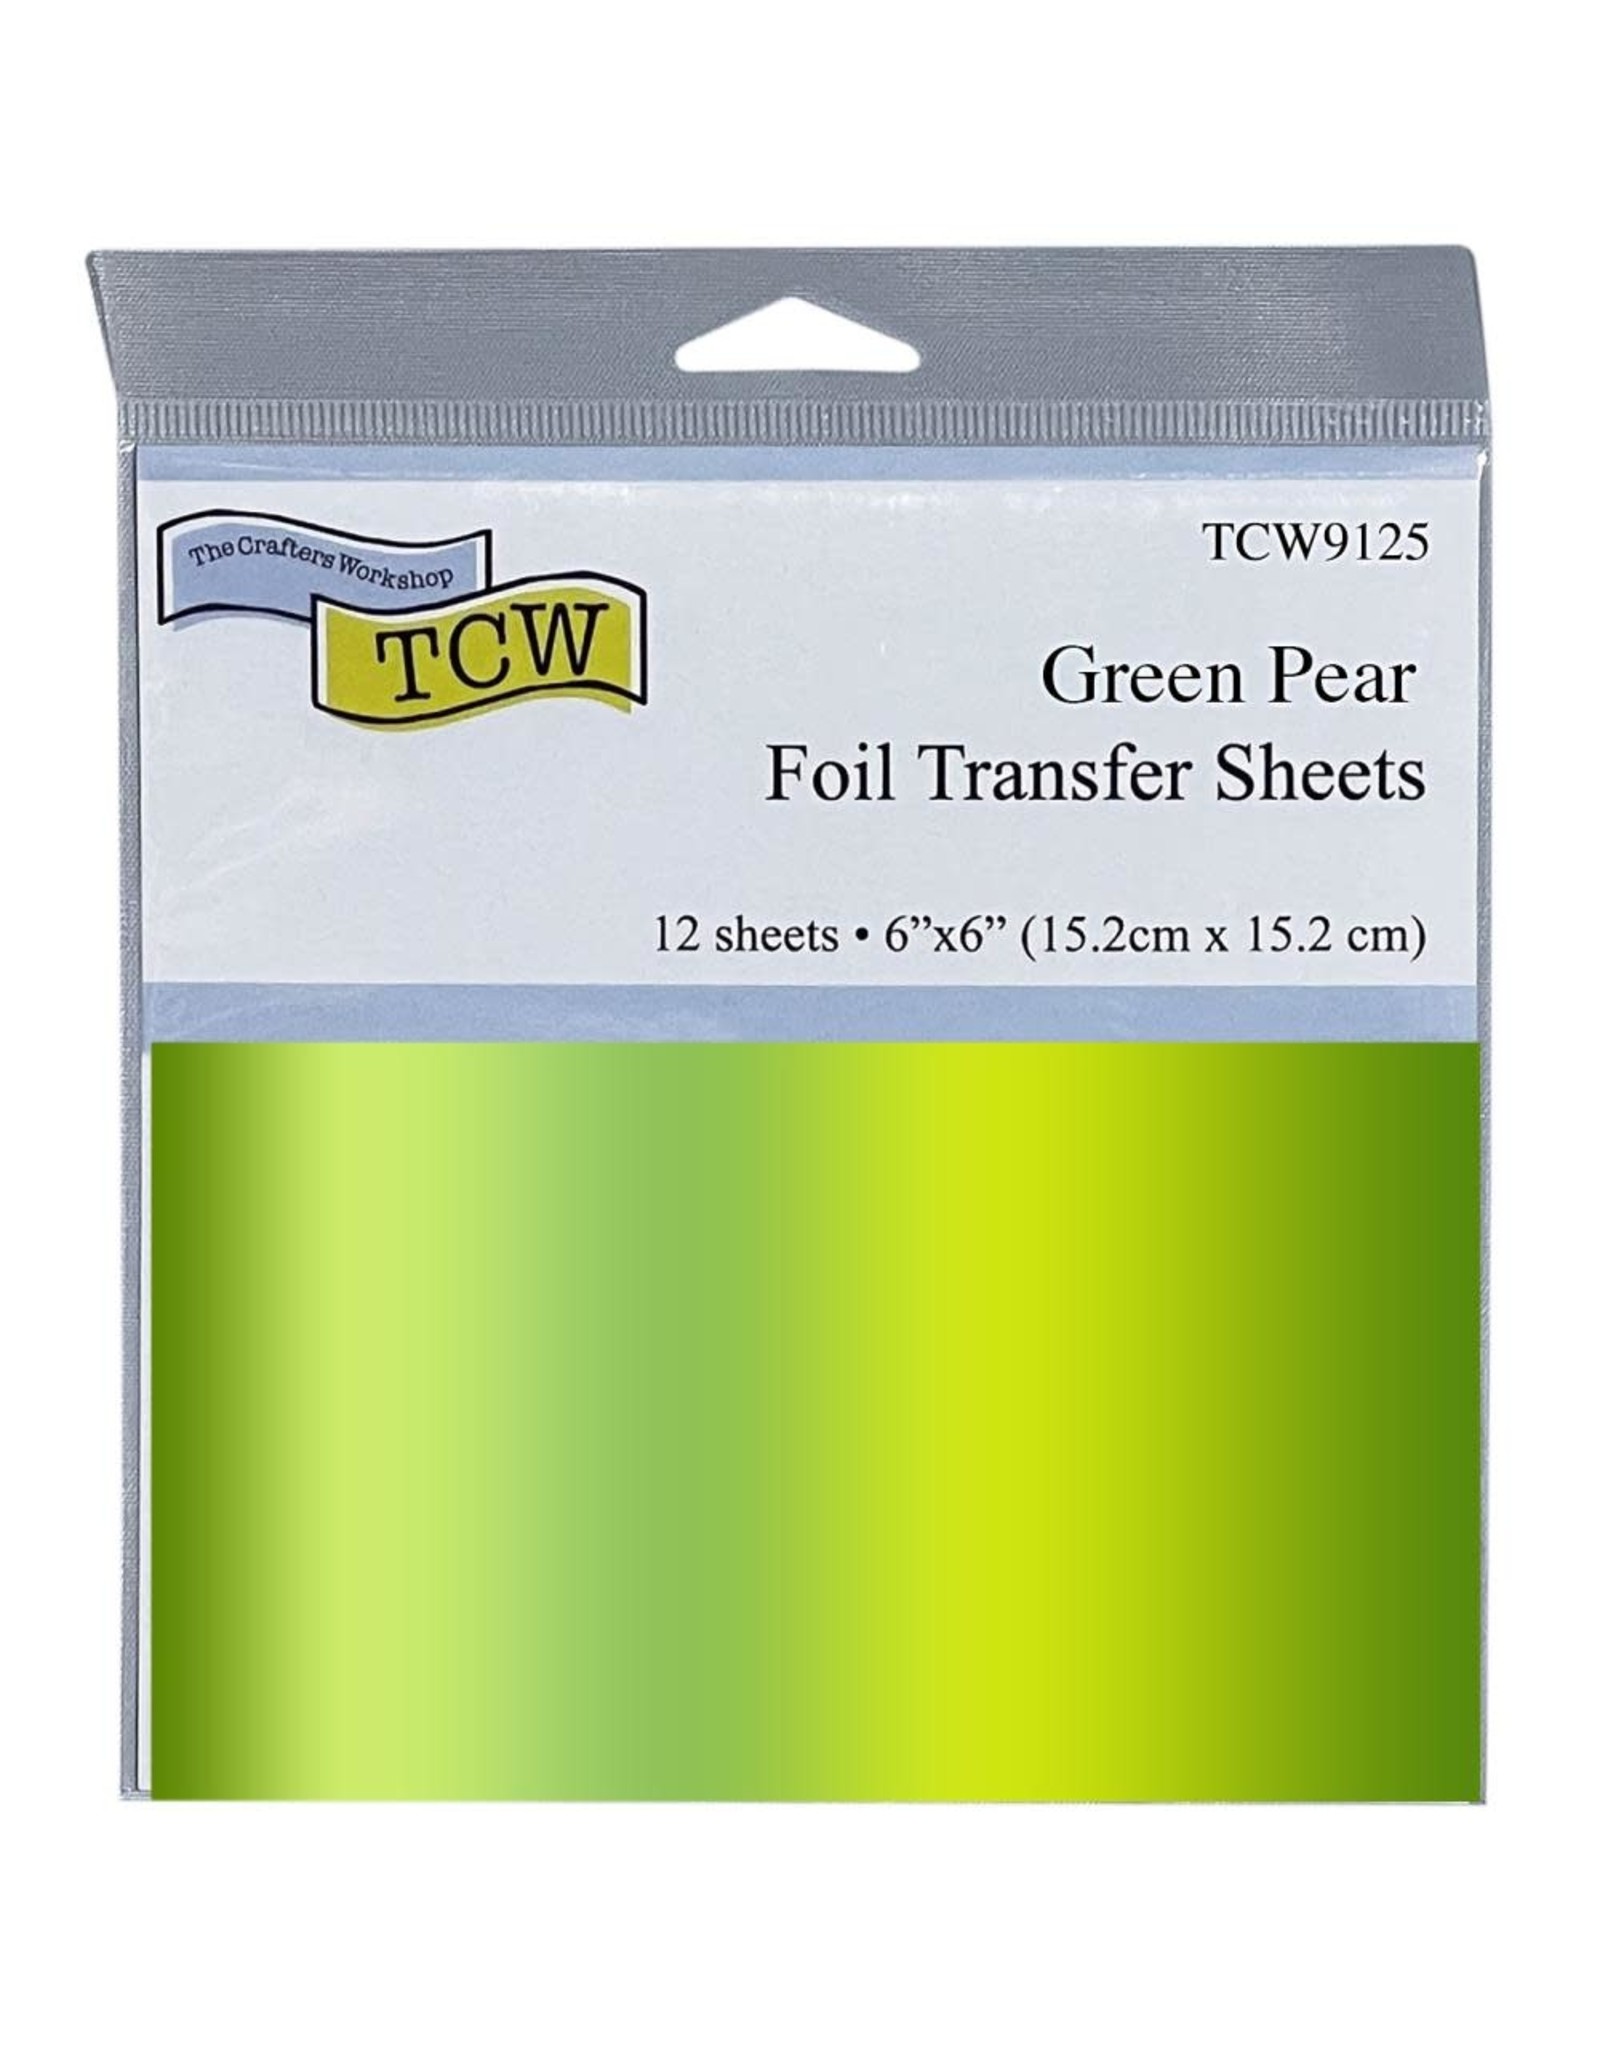 THERMOWEB THE CRAFTER'S WORKSHOP GREEN PEAR 6x6 FOIL TRANSFER SHEETS 12/PK